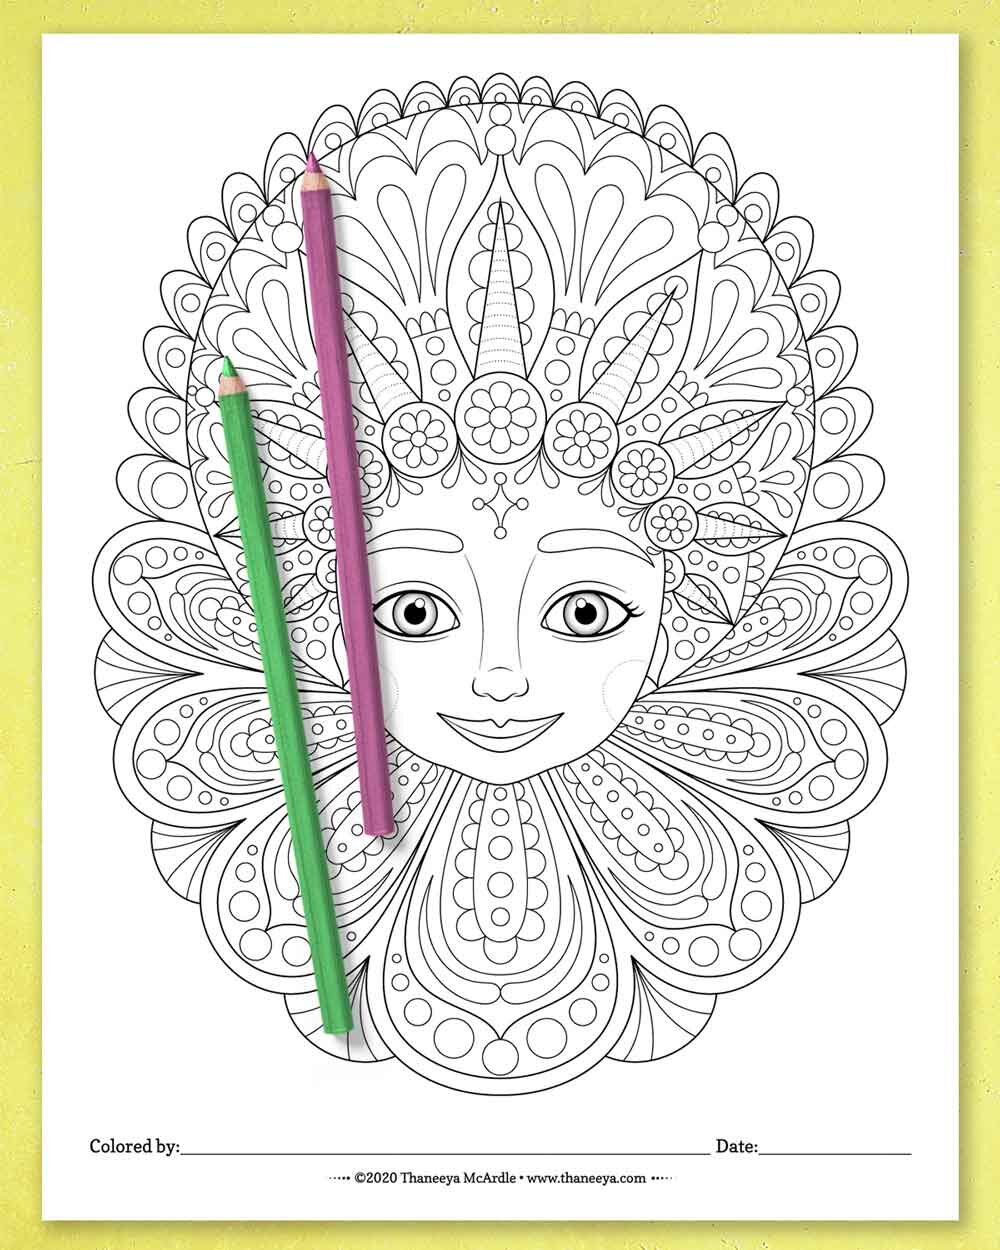 Enchanted Faces Coloring Pages by Thaneeya McArdle - Set of 10 printable coloring pages to download and color!